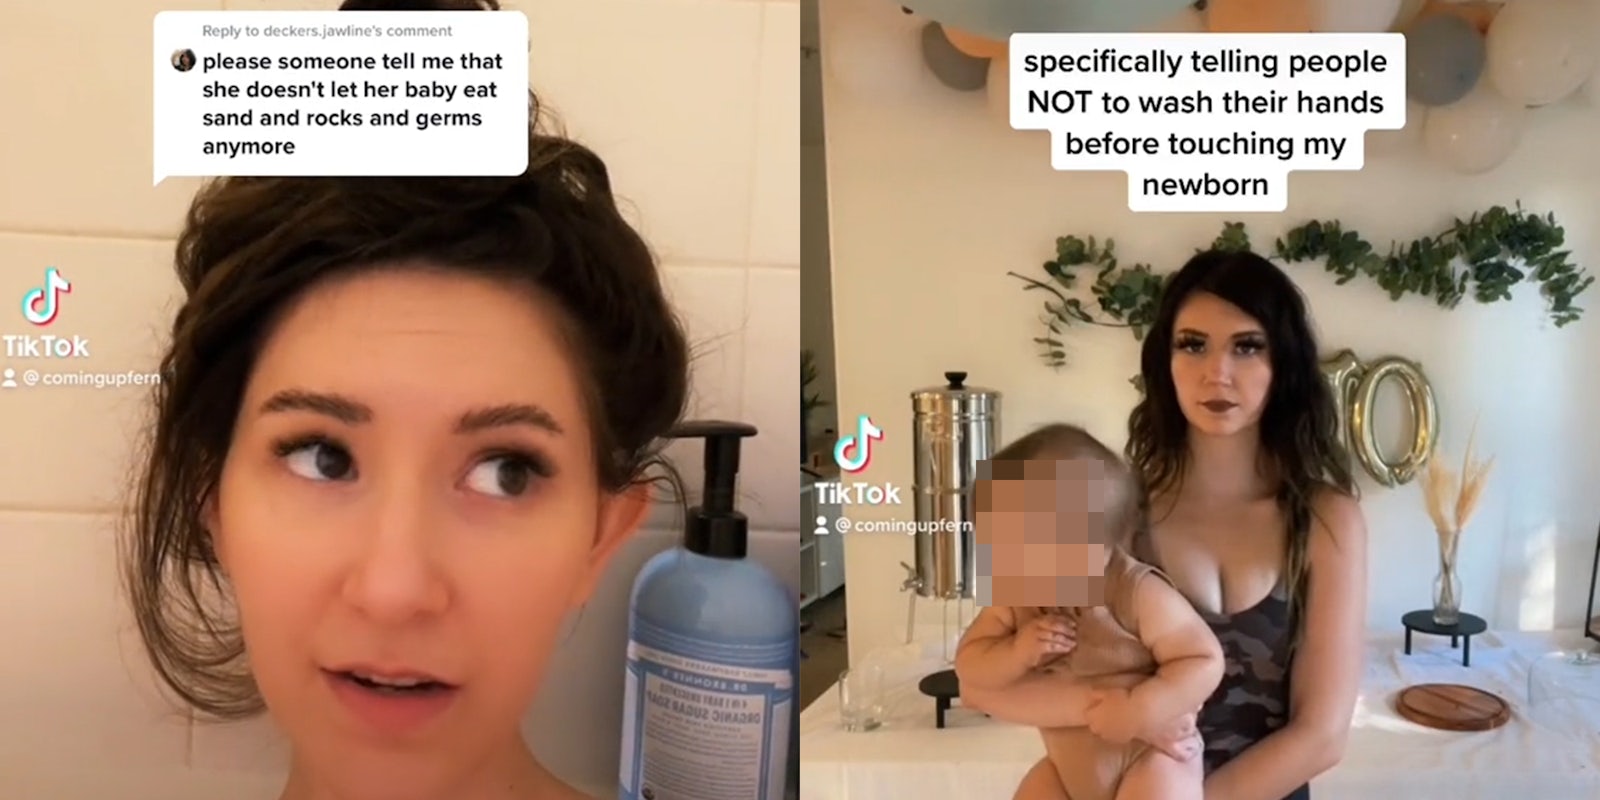 woman in bathroom with caption 'please someone tell me that she doesn't let her baby eat sand and rocks and germs anymore' (L) woman holding baby with caption 'specifically telling people NOT to wash their hands before touching my newborn'